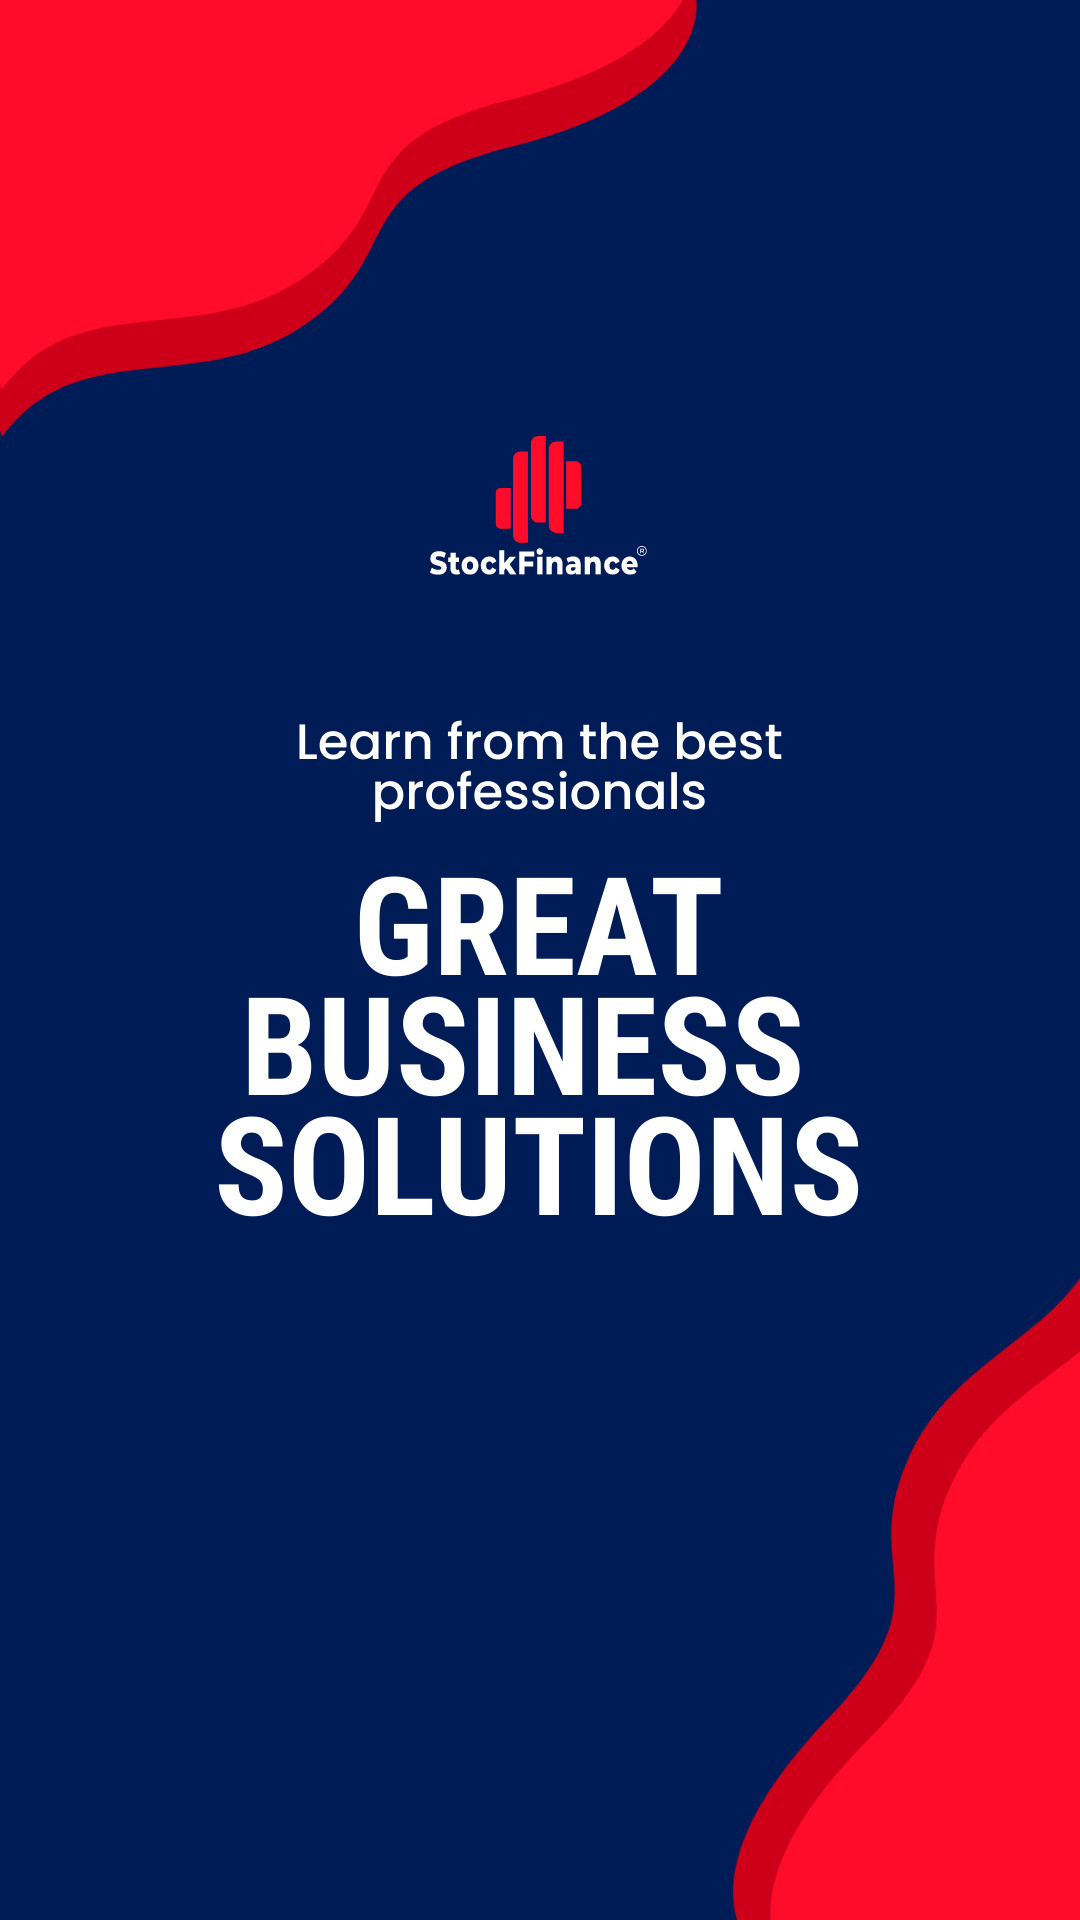 Great Business Solutions